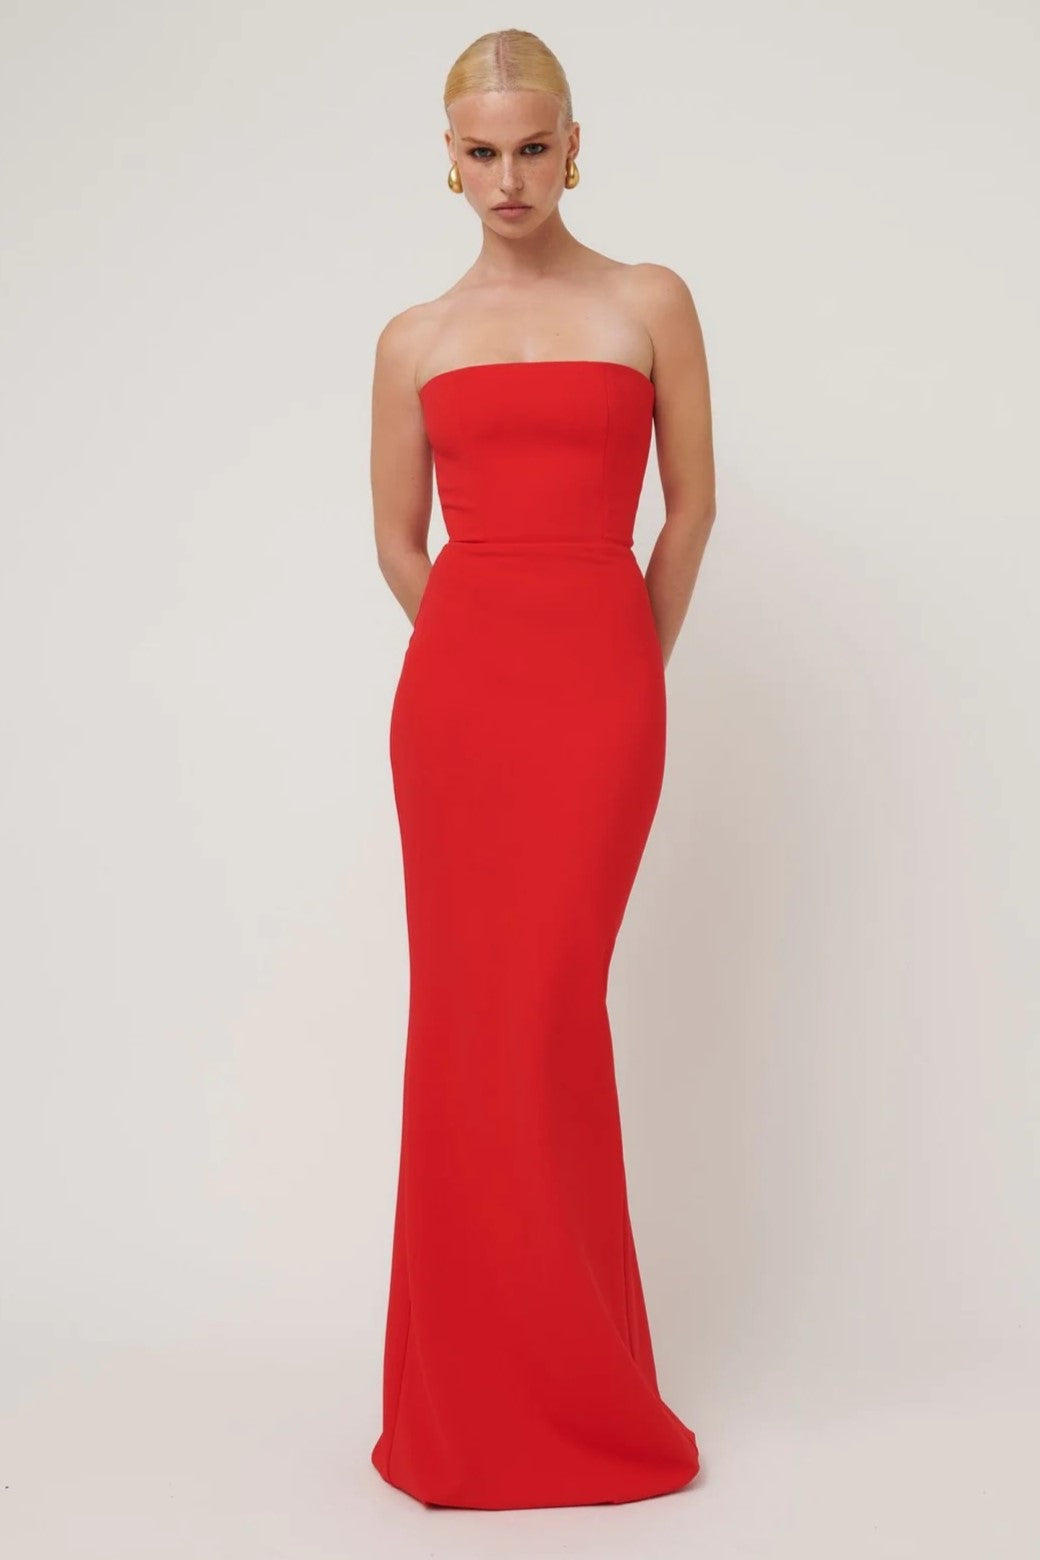 Jackie O Gown - Cherry Red - SHOPJAUS - JAUS